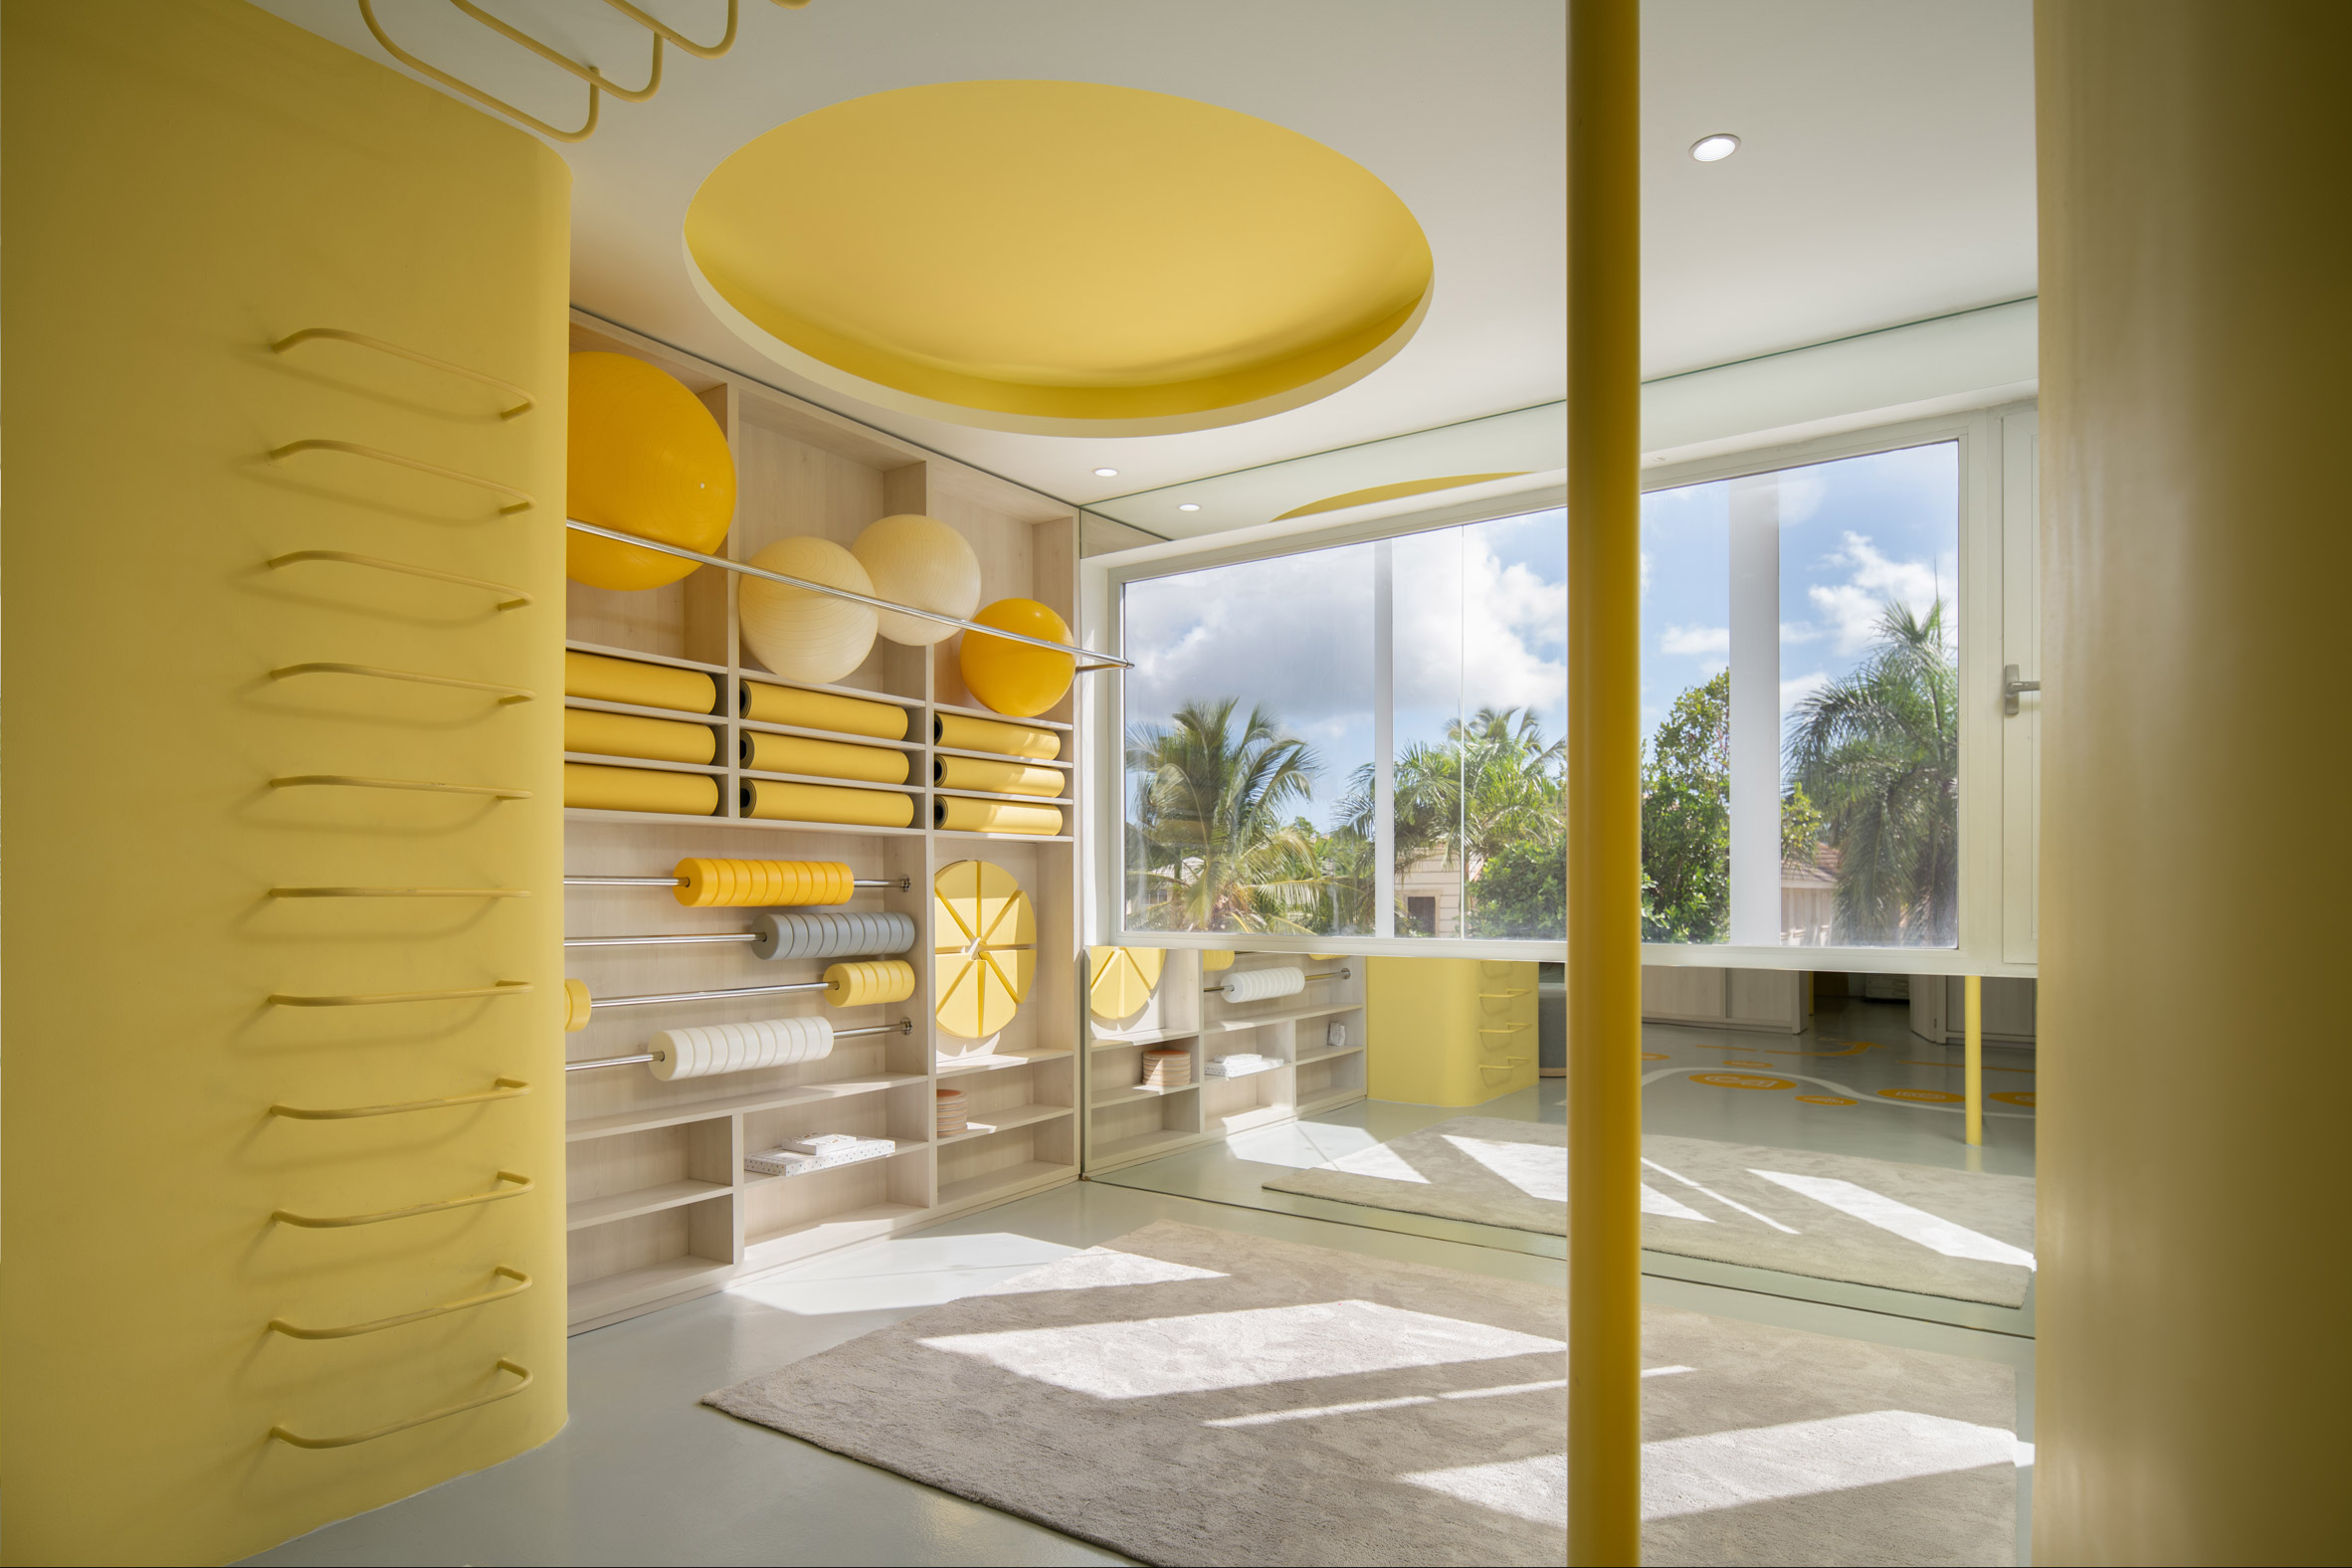 A school lobby with yellow walls